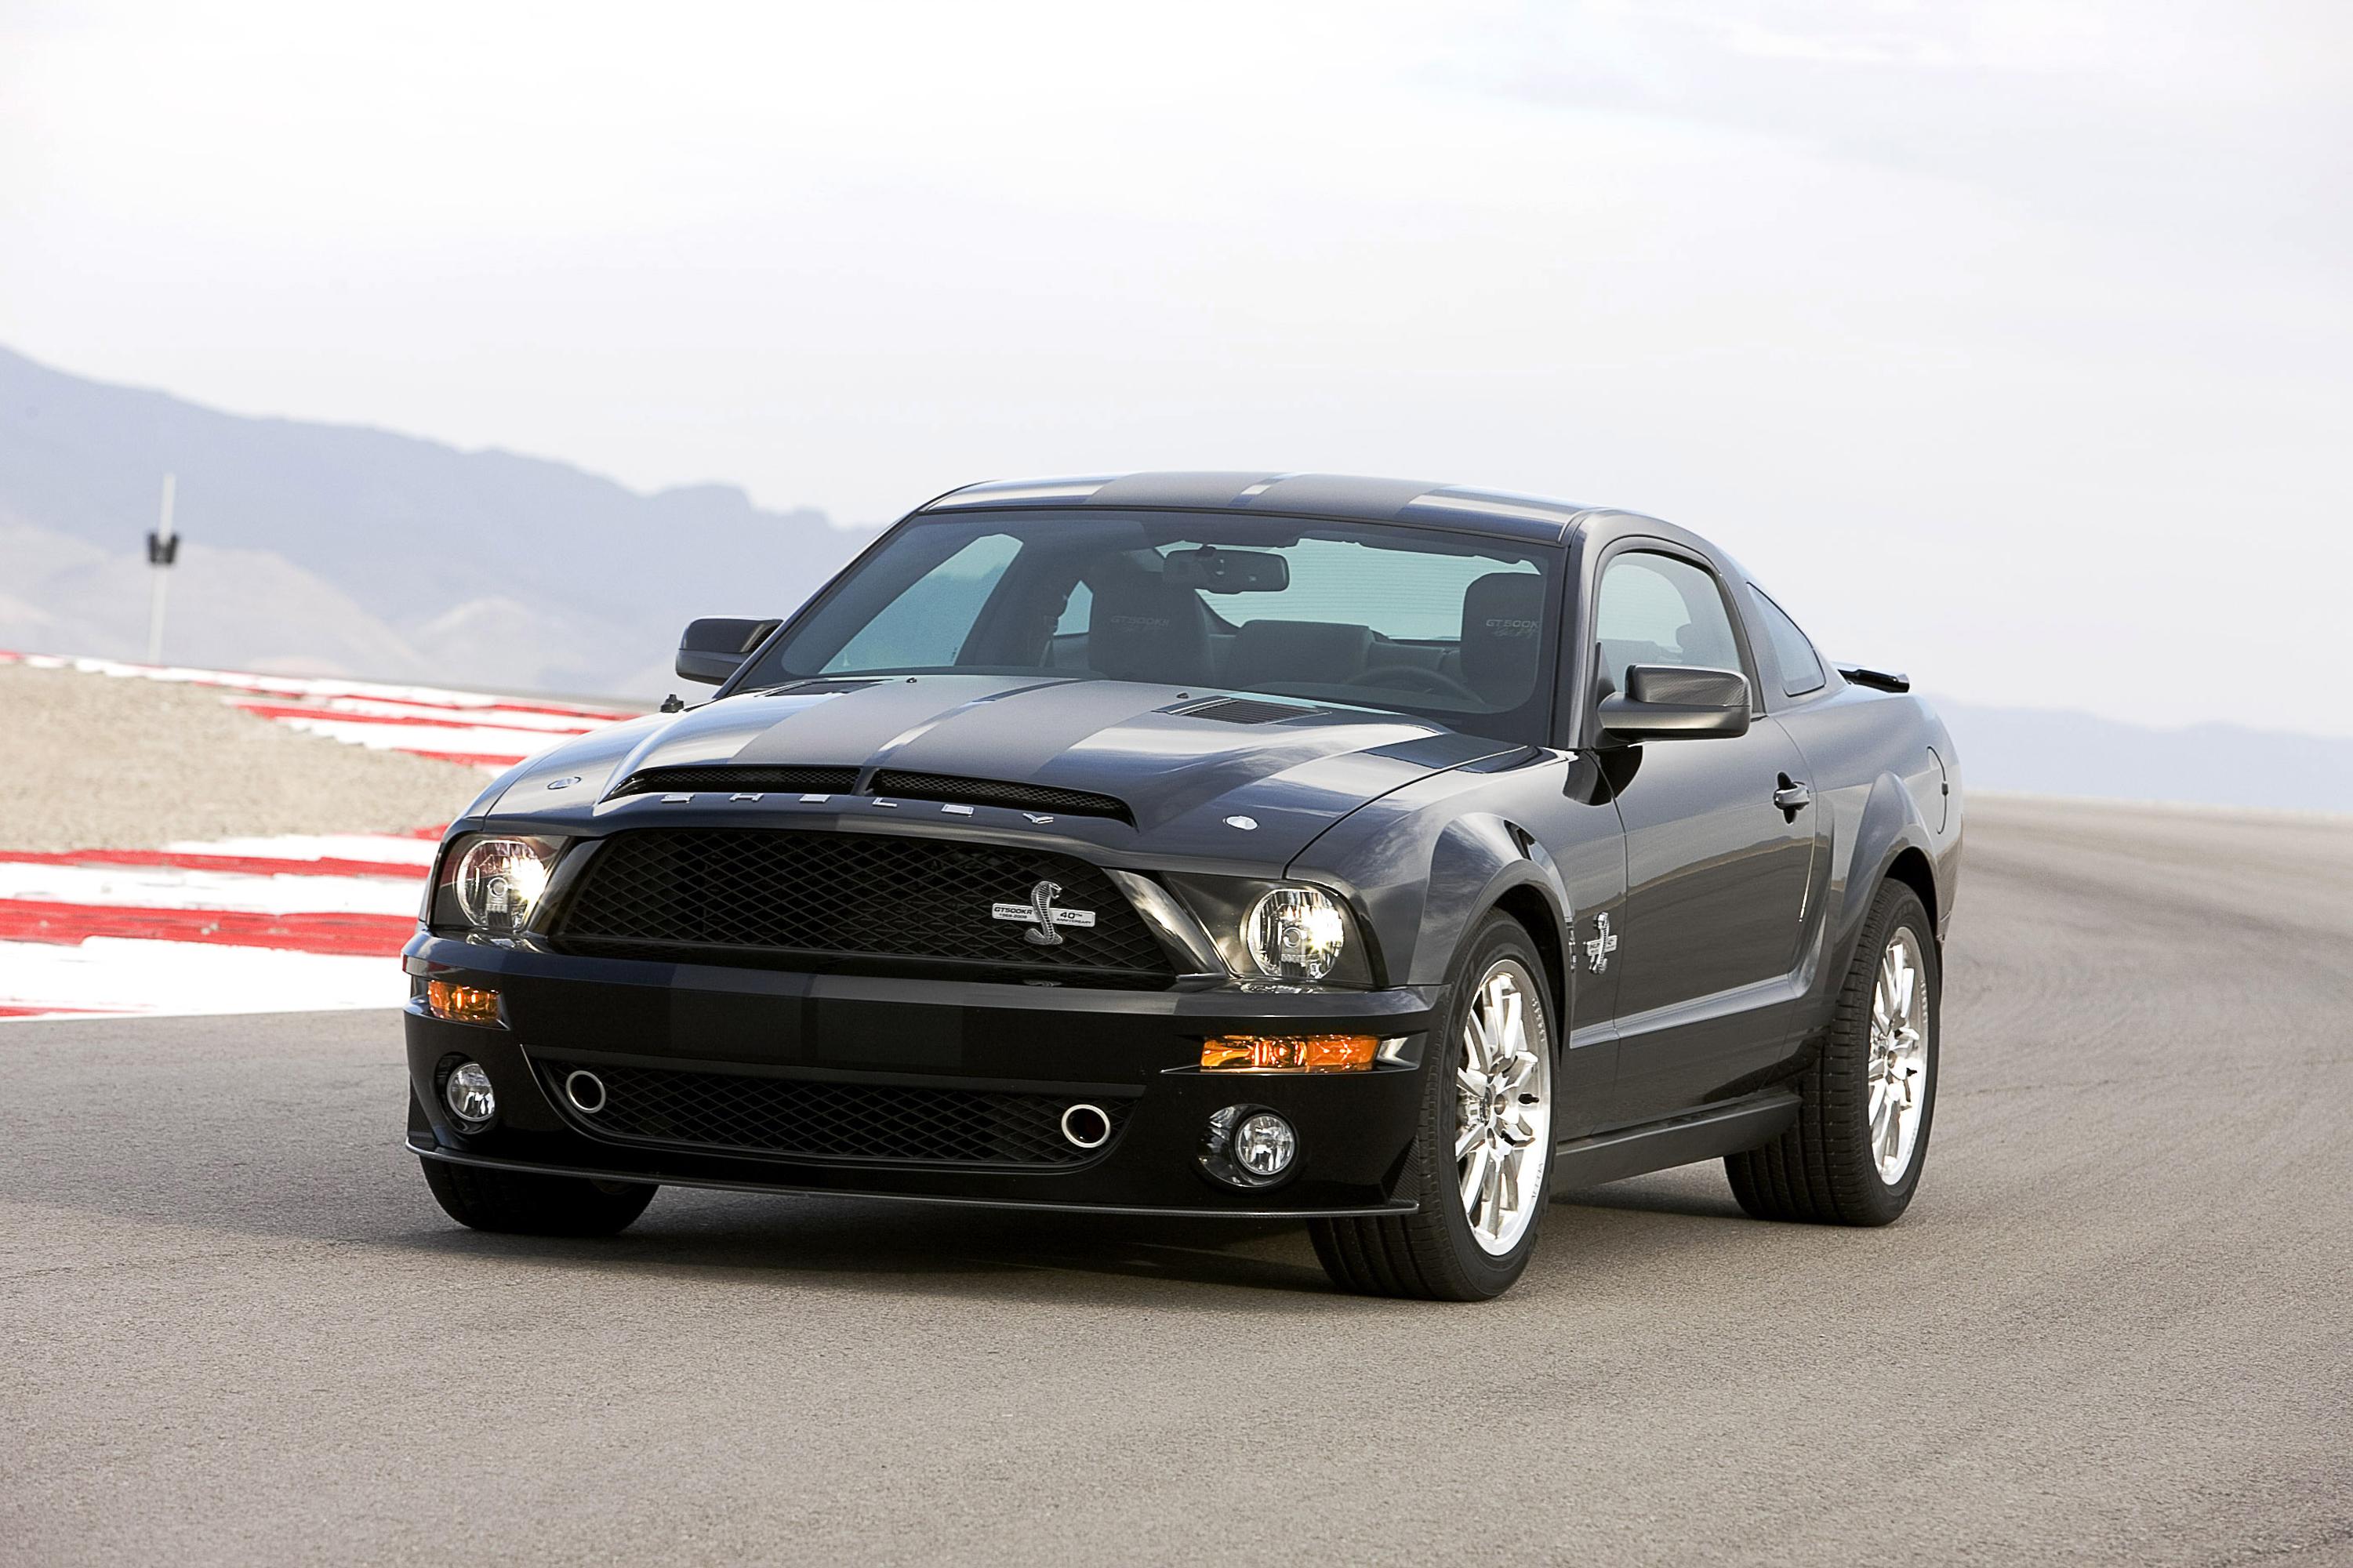 Мустанг 2008. Ford Shelby gt500kr 2008. Ford Mustang Shelby gt500kr 2008. Форд Мустанг Шелби gt 500. Shelby Mustang gt500kr 2008.